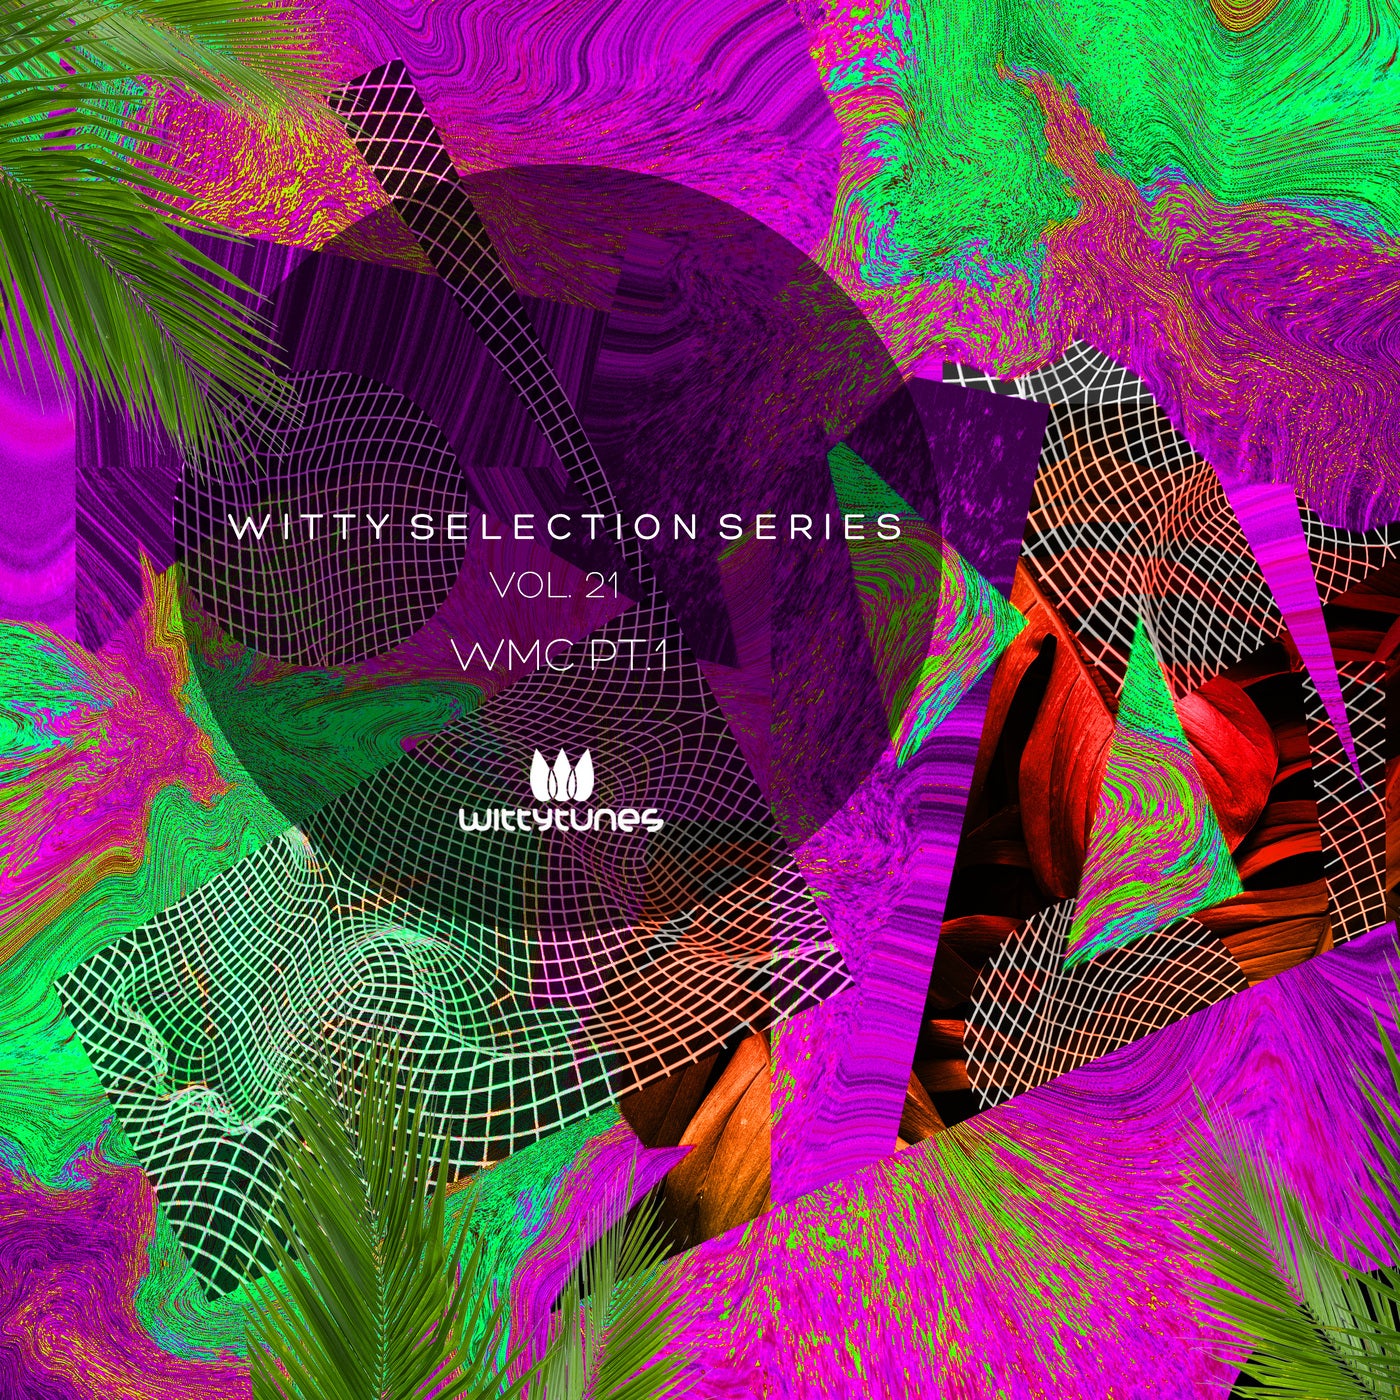 Witty Selection Series Vol. 21 - WMC PT1